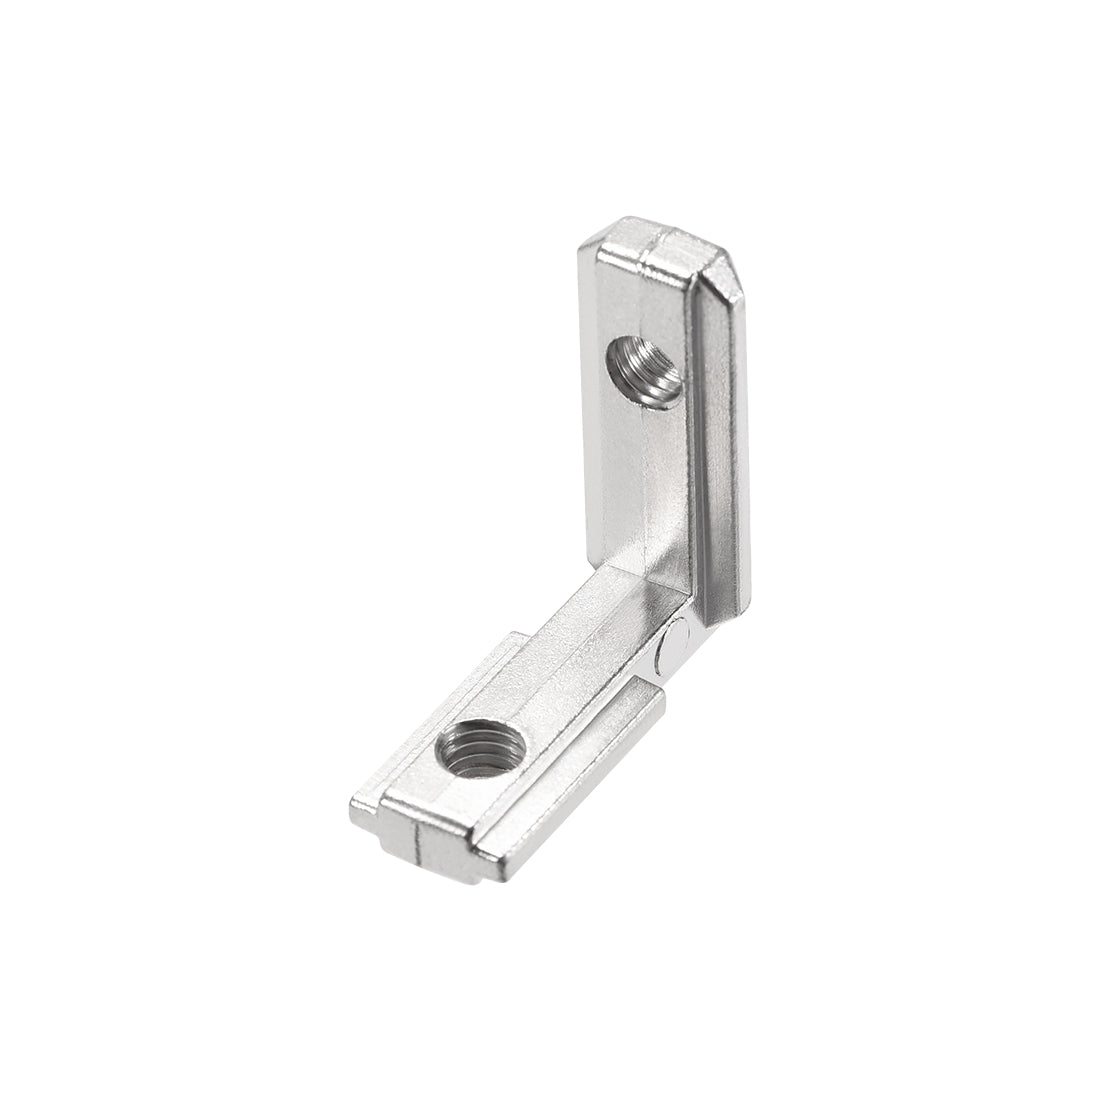 uxcell Uxcell Interior Joint Bracket, Inside Corner Connector 2020 Series Slot 6mm for Aluminum Extrusion Profile, 20 Pcs